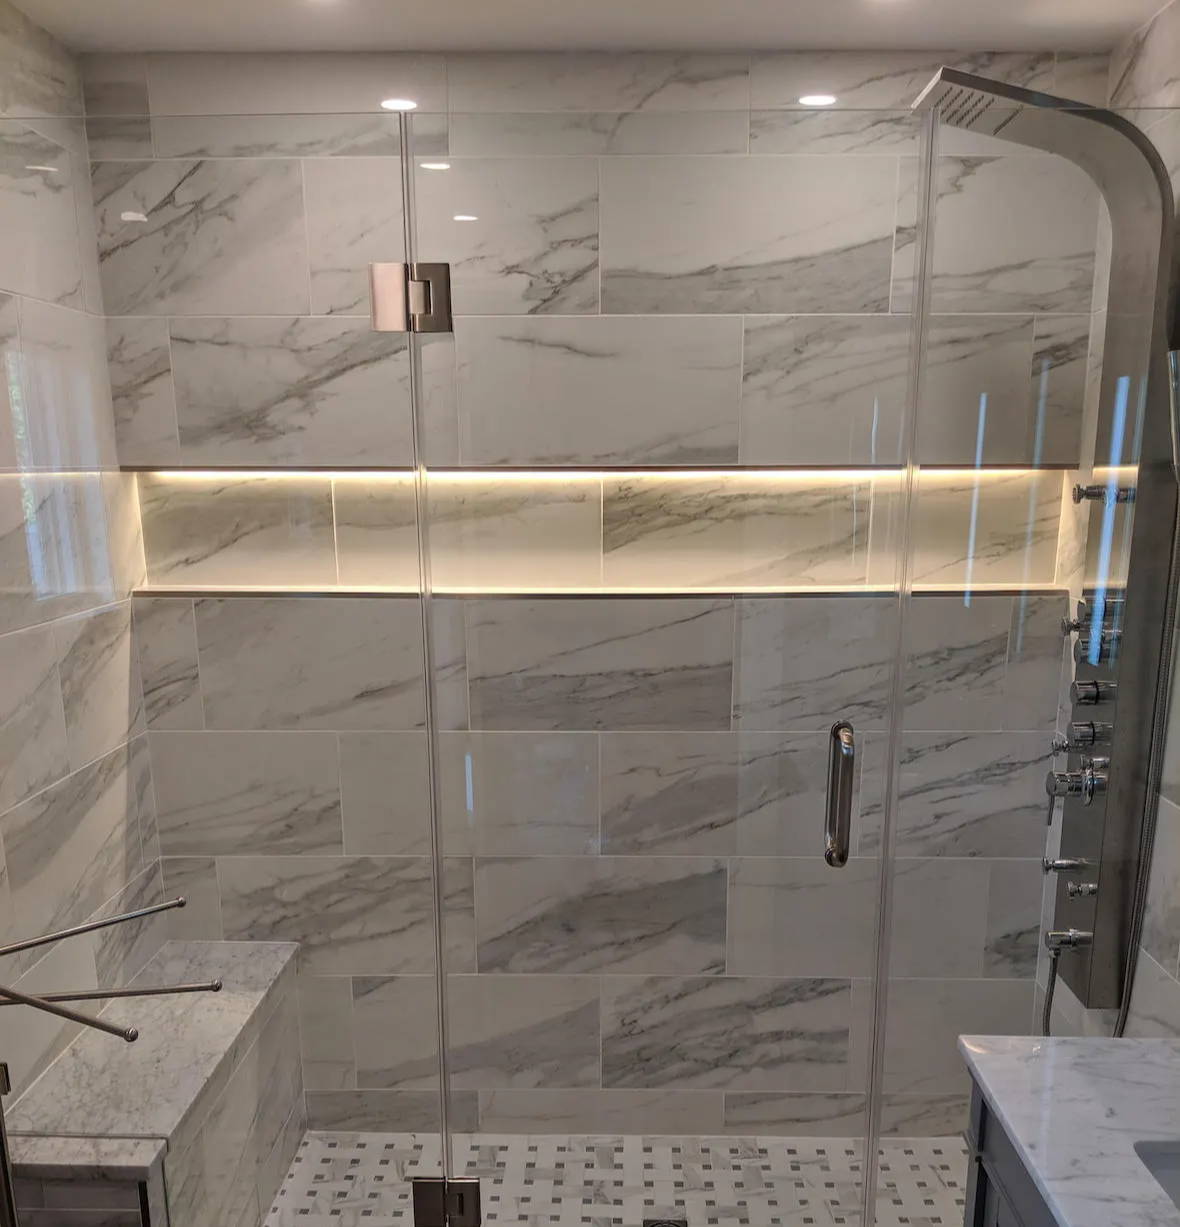 Popular lighting niches in showers using LED strips